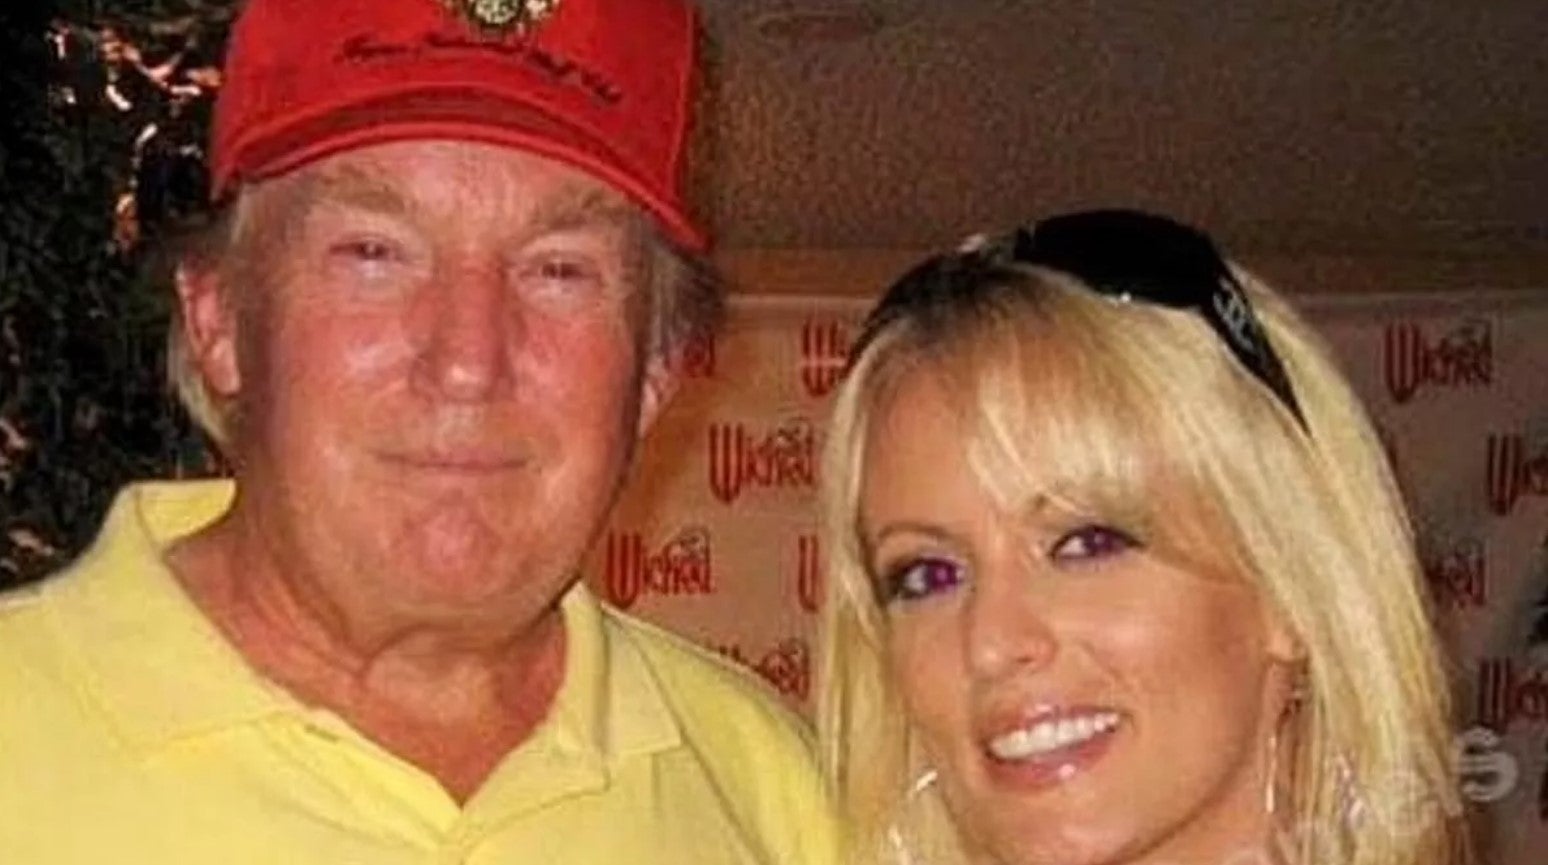 Donald Trump pictured with Stormy Daniels at the 2006 golf tournament